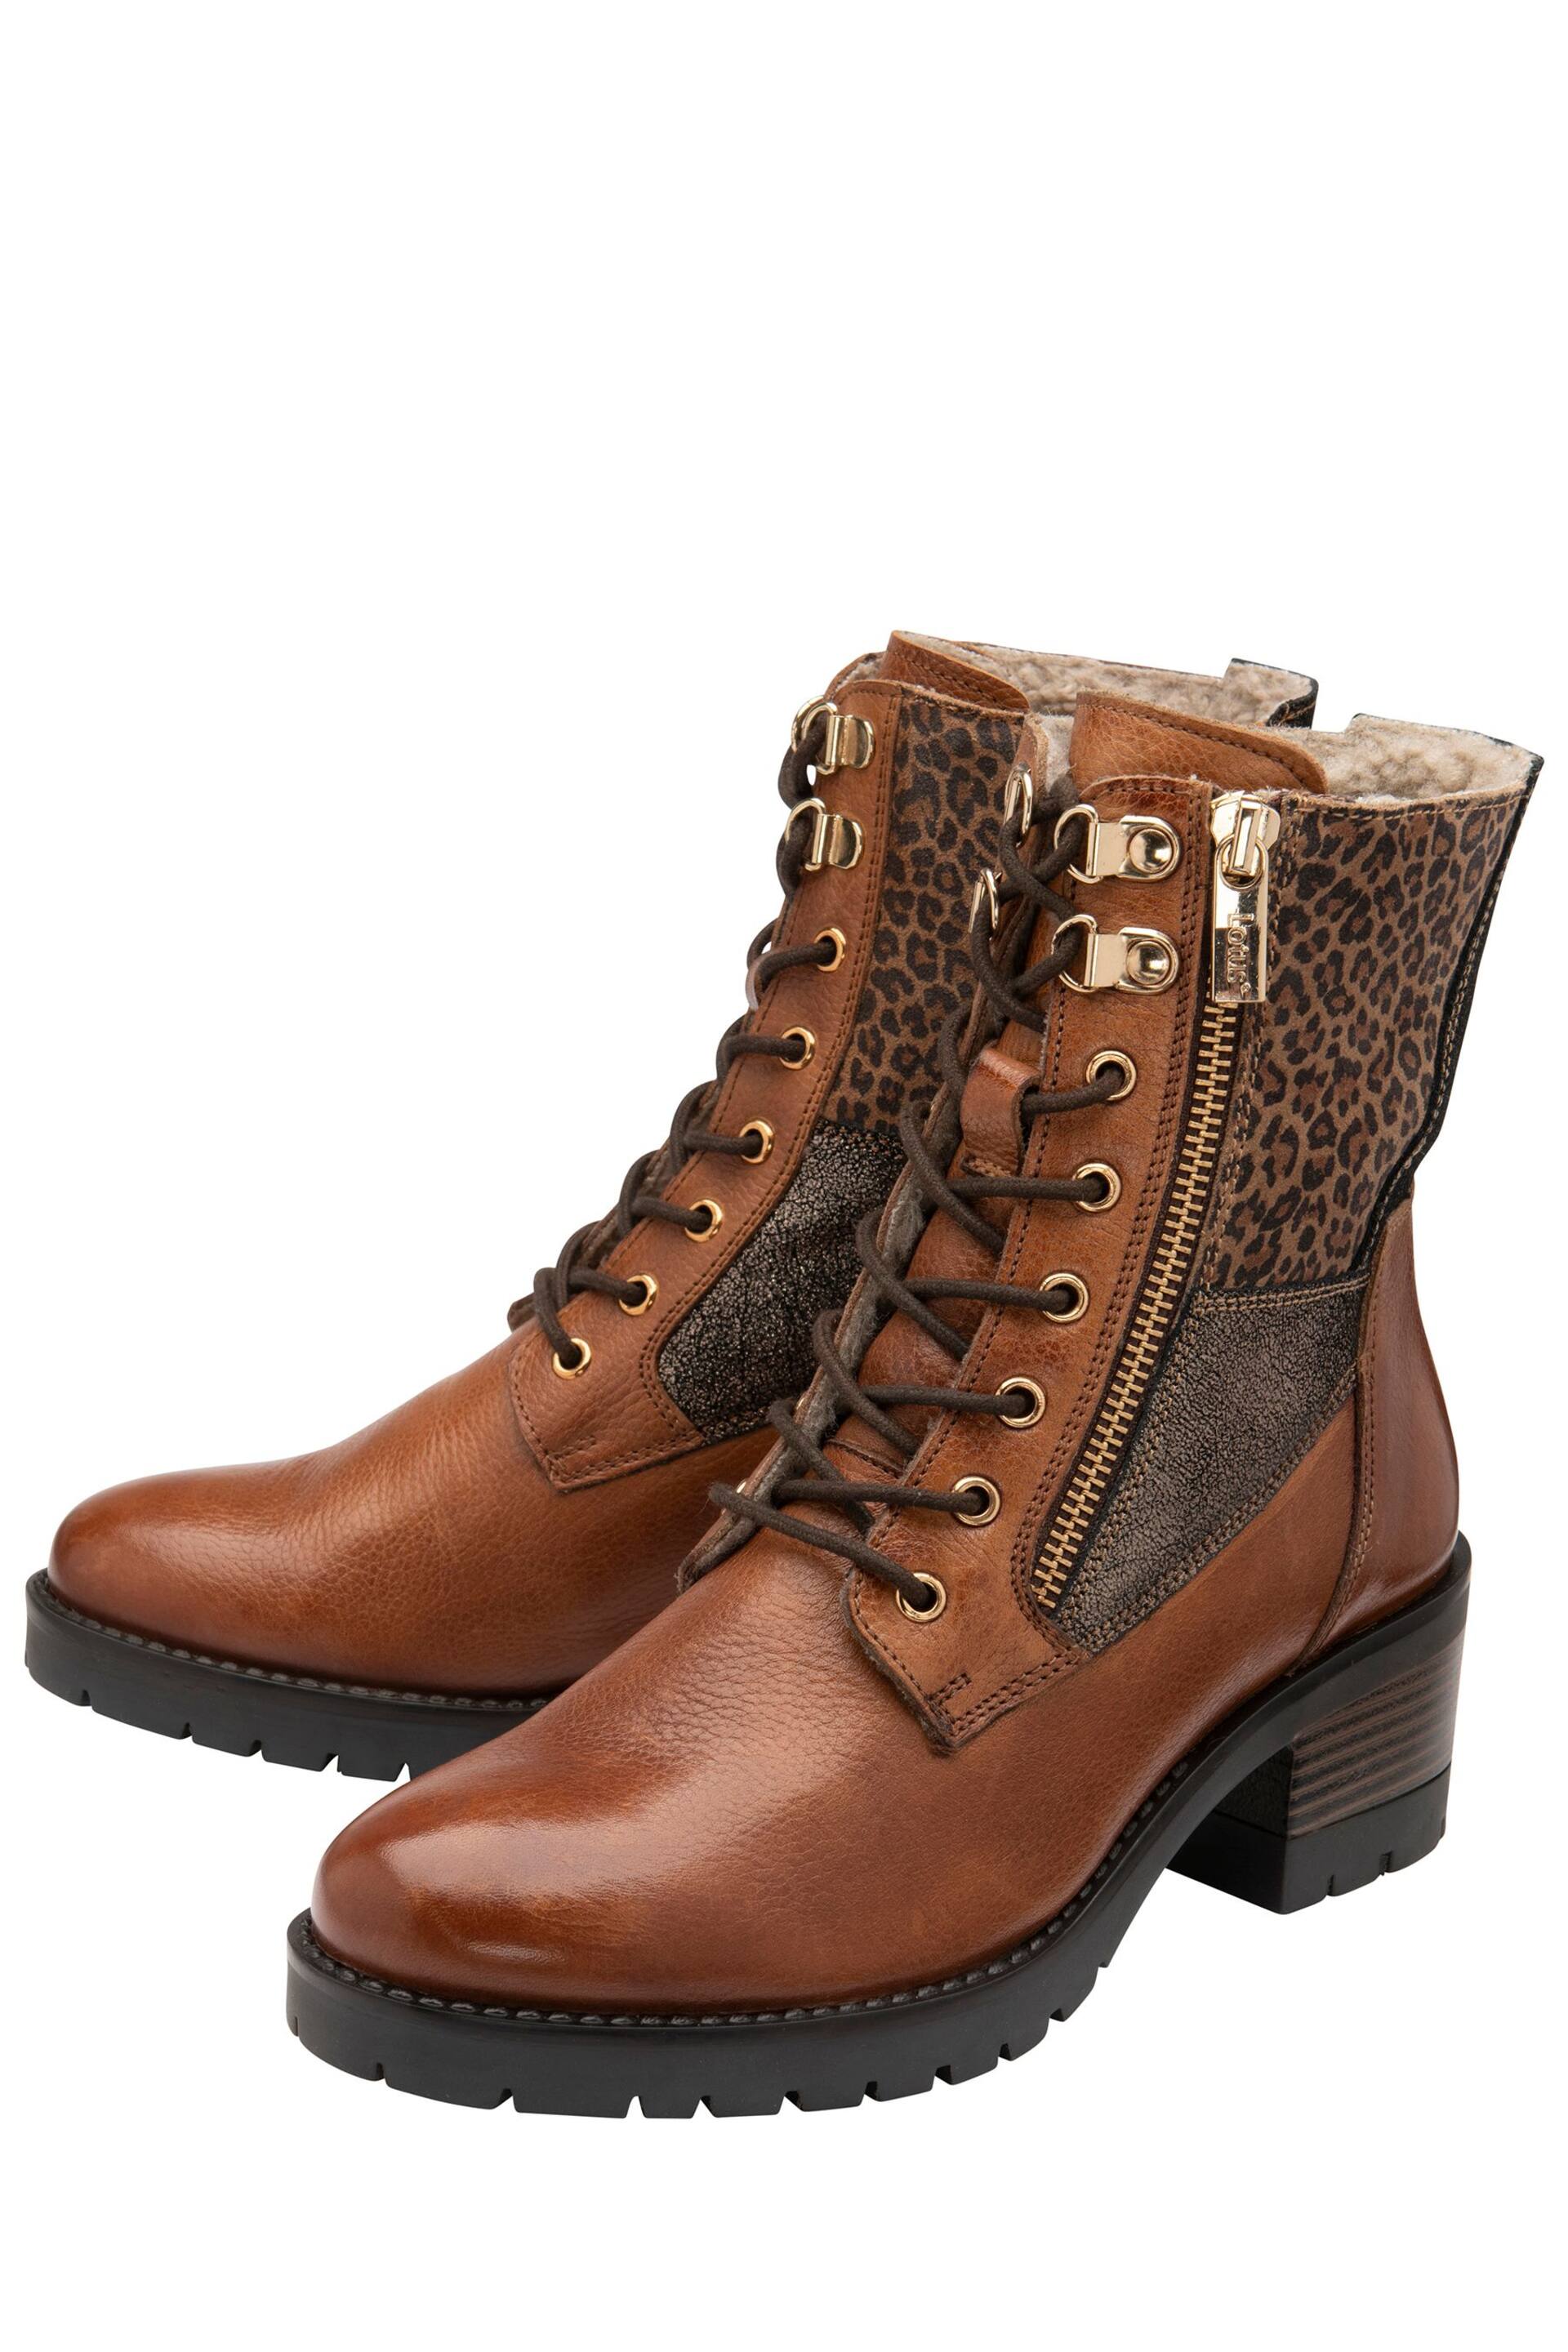 Lotus Light Brown Leather Zip-Up Ankle Boots - Image 2 of 4